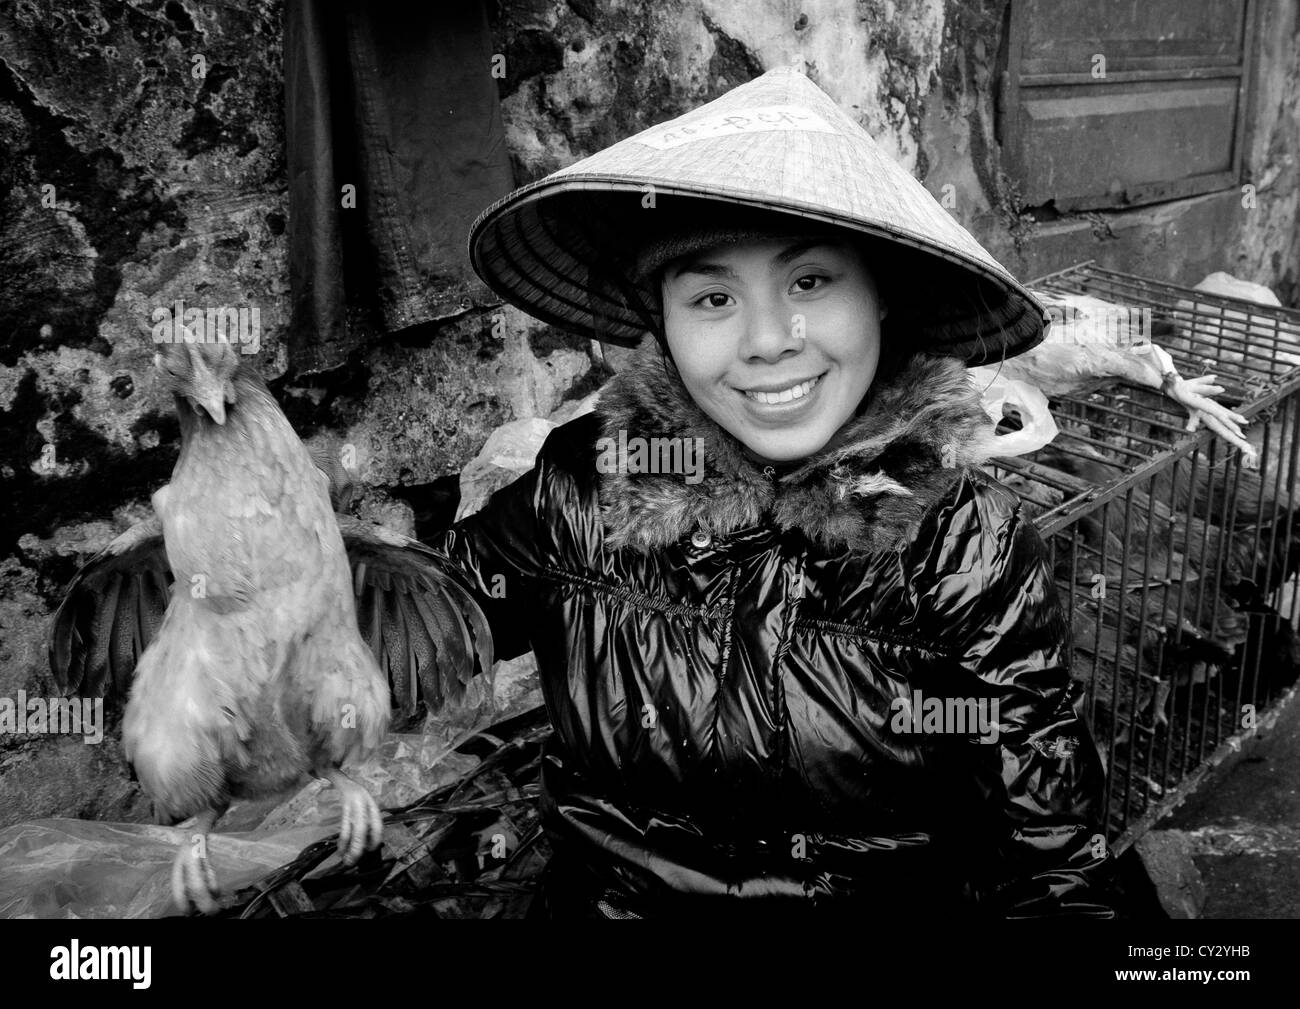 Woman With A Sedge Hat Showing A Chicken She Sells, Sapa, Vietnam Stock Photo